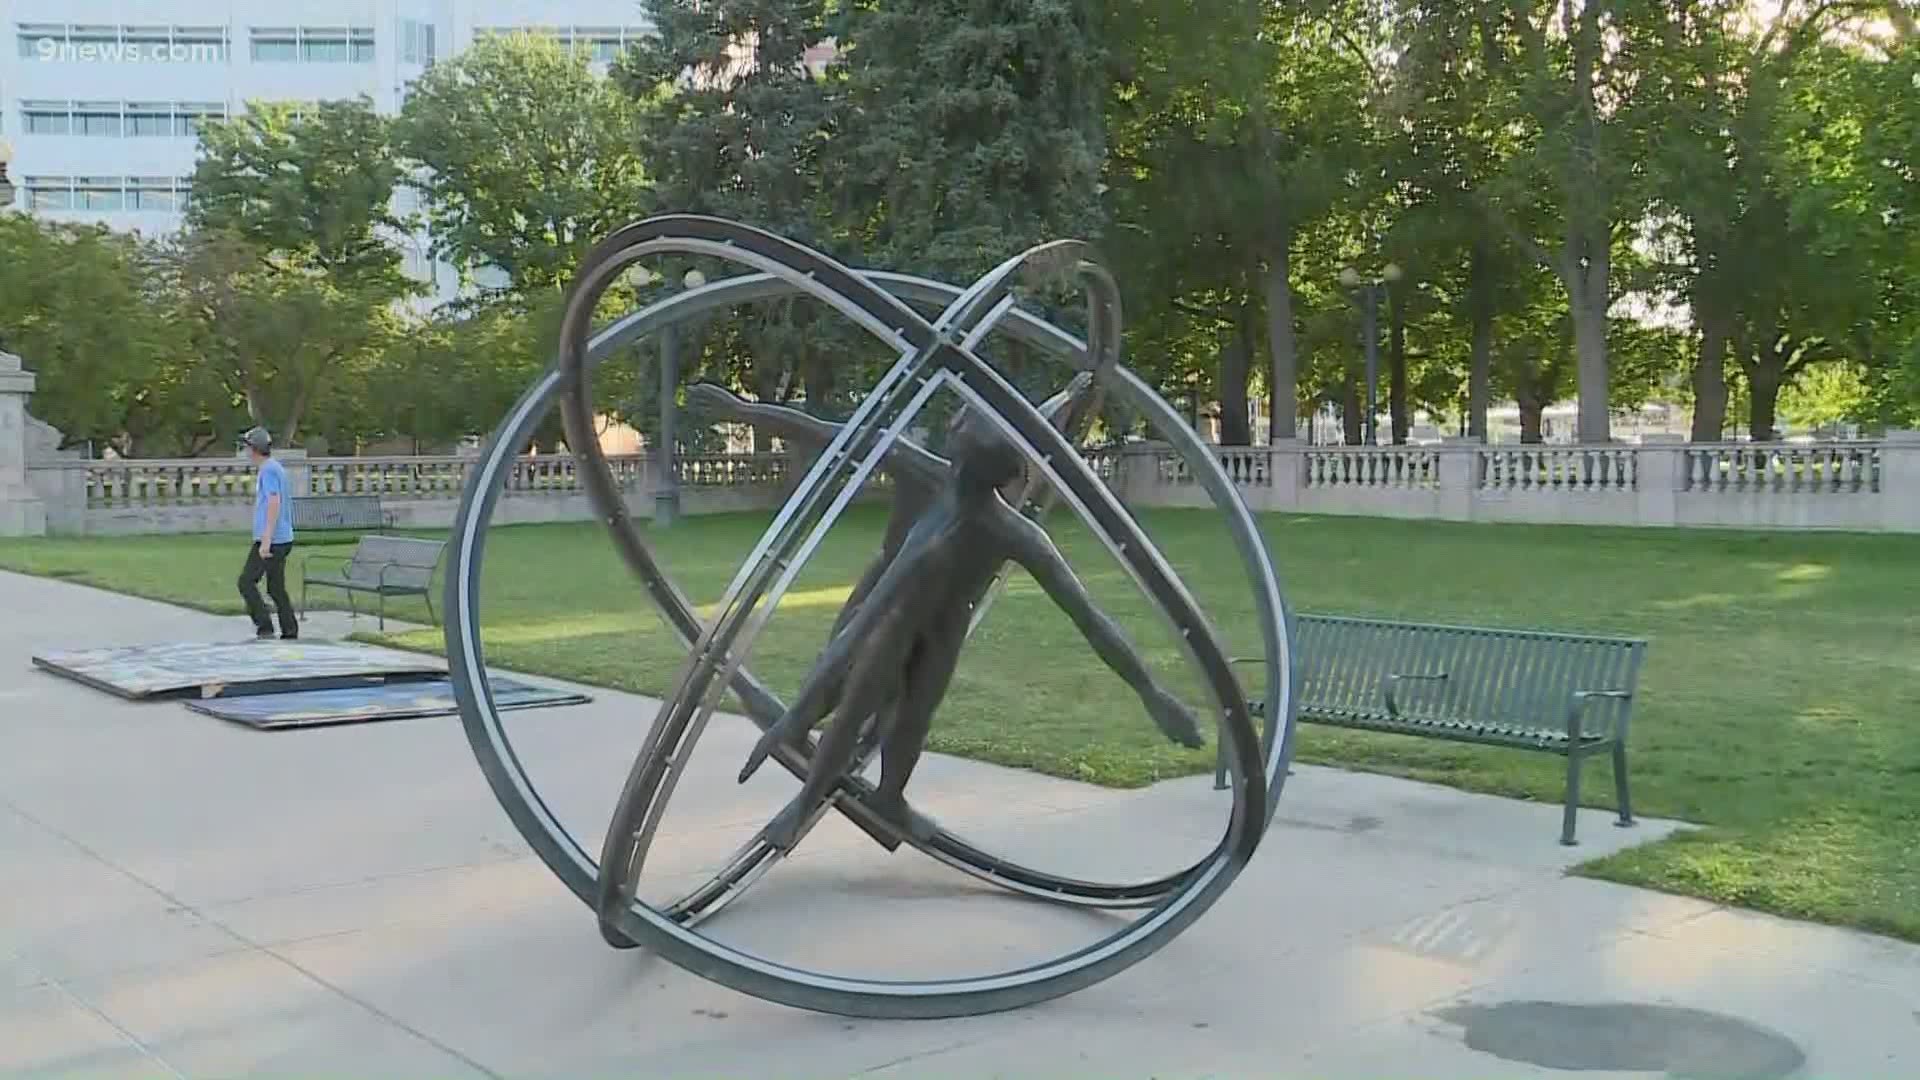 Denver Police said they're investigating and that the statue at Civic Center Park was torn down around 11 p.m. Thursday.